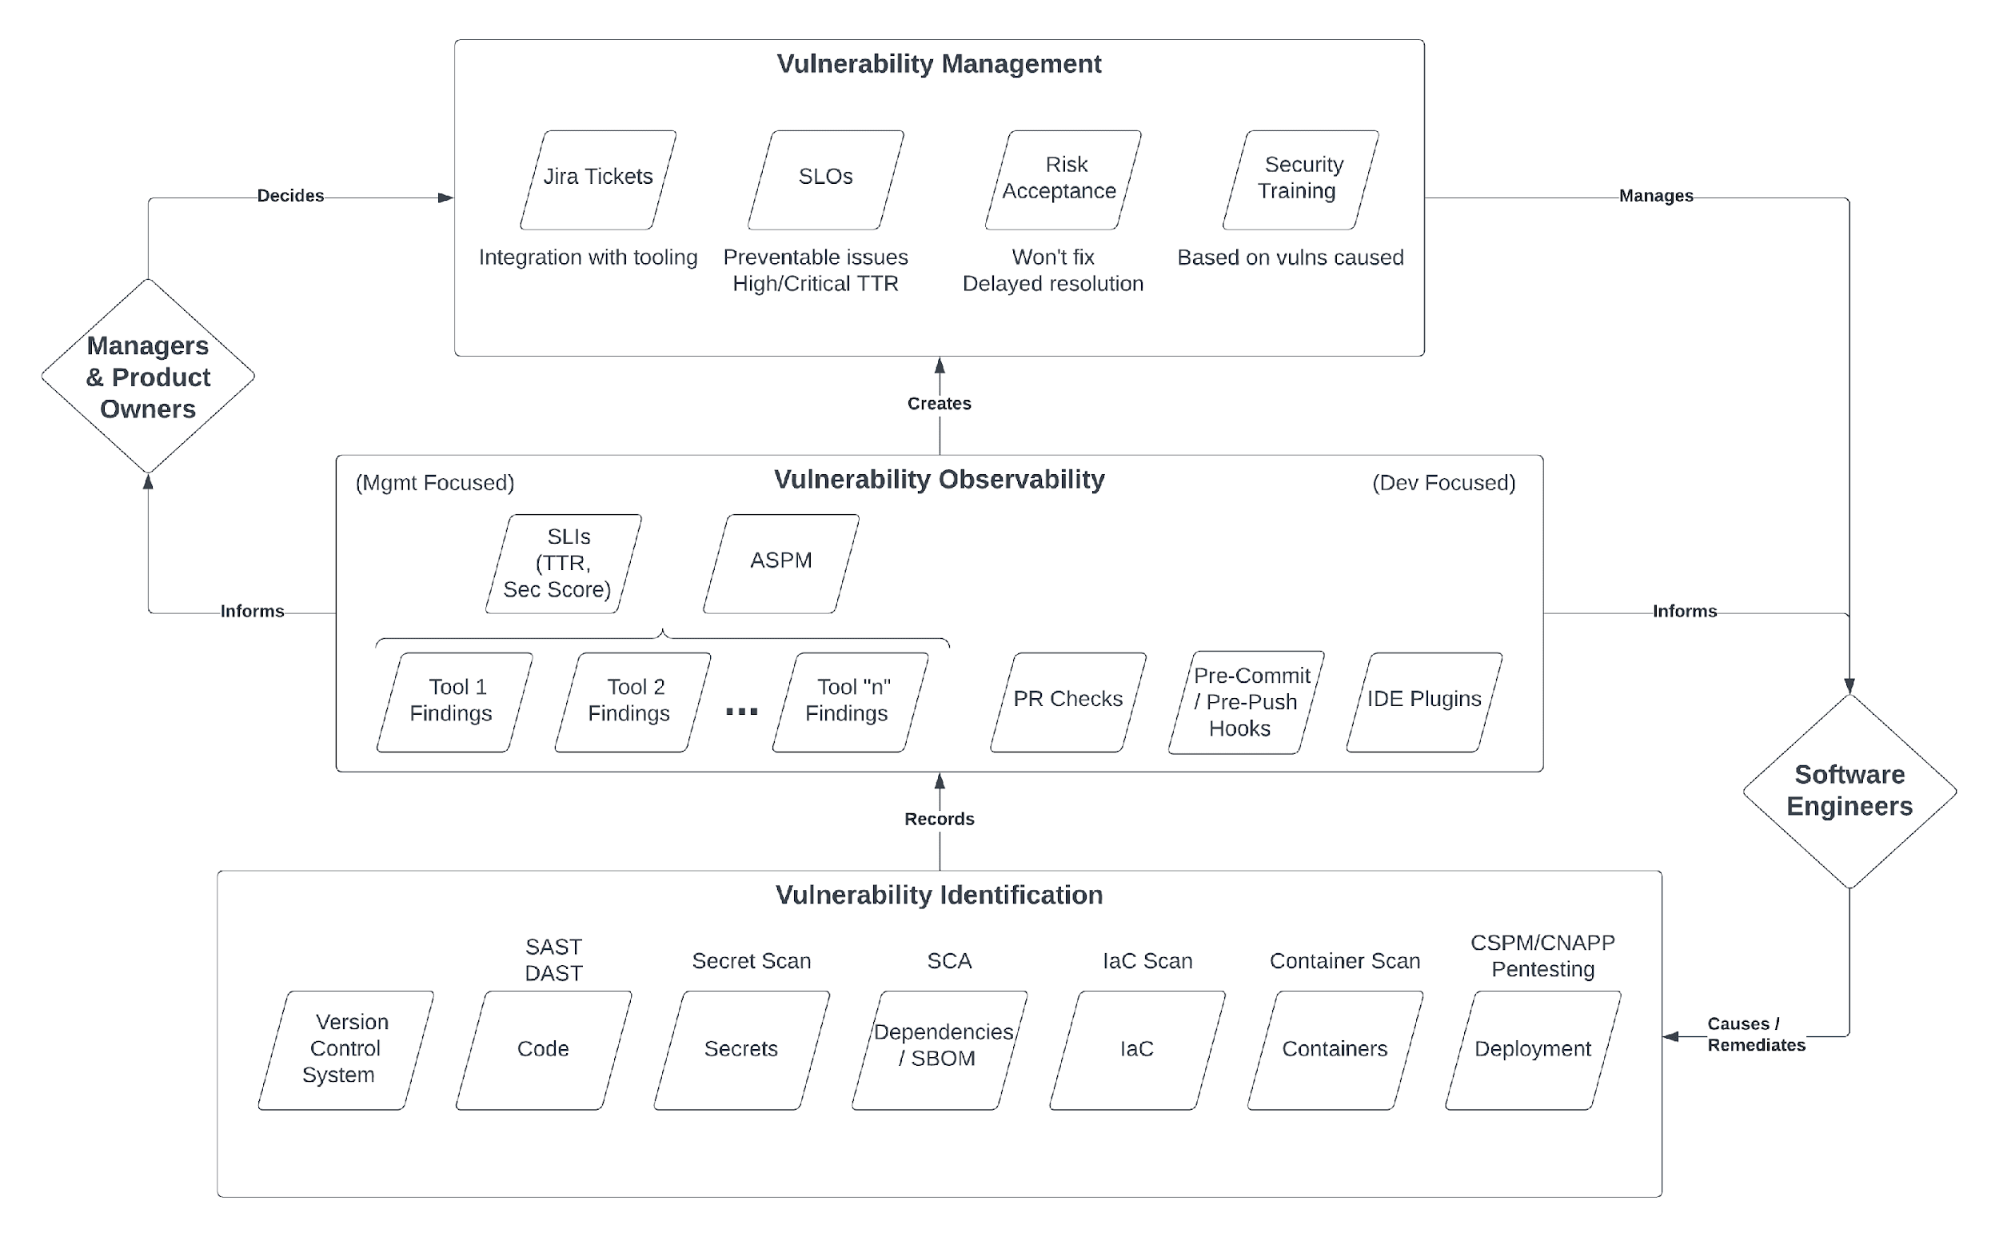 Vulnerability Management Lifecycle in DevSecOps